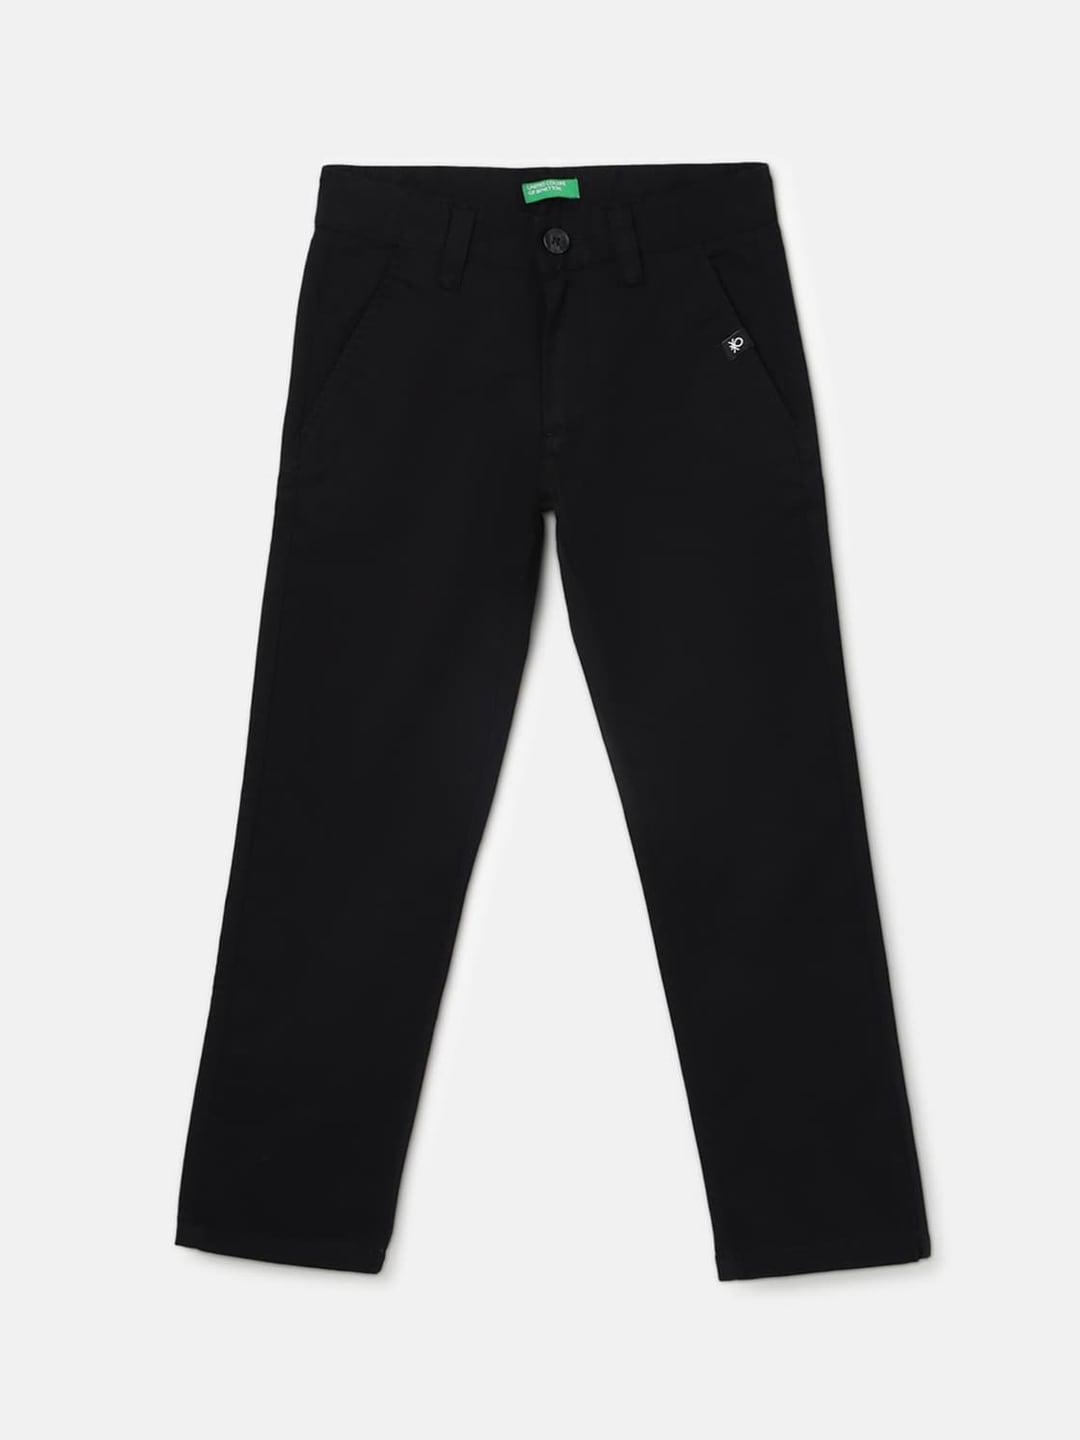 United Colors of Benetton Boys Slim Fit Chinos Trousers